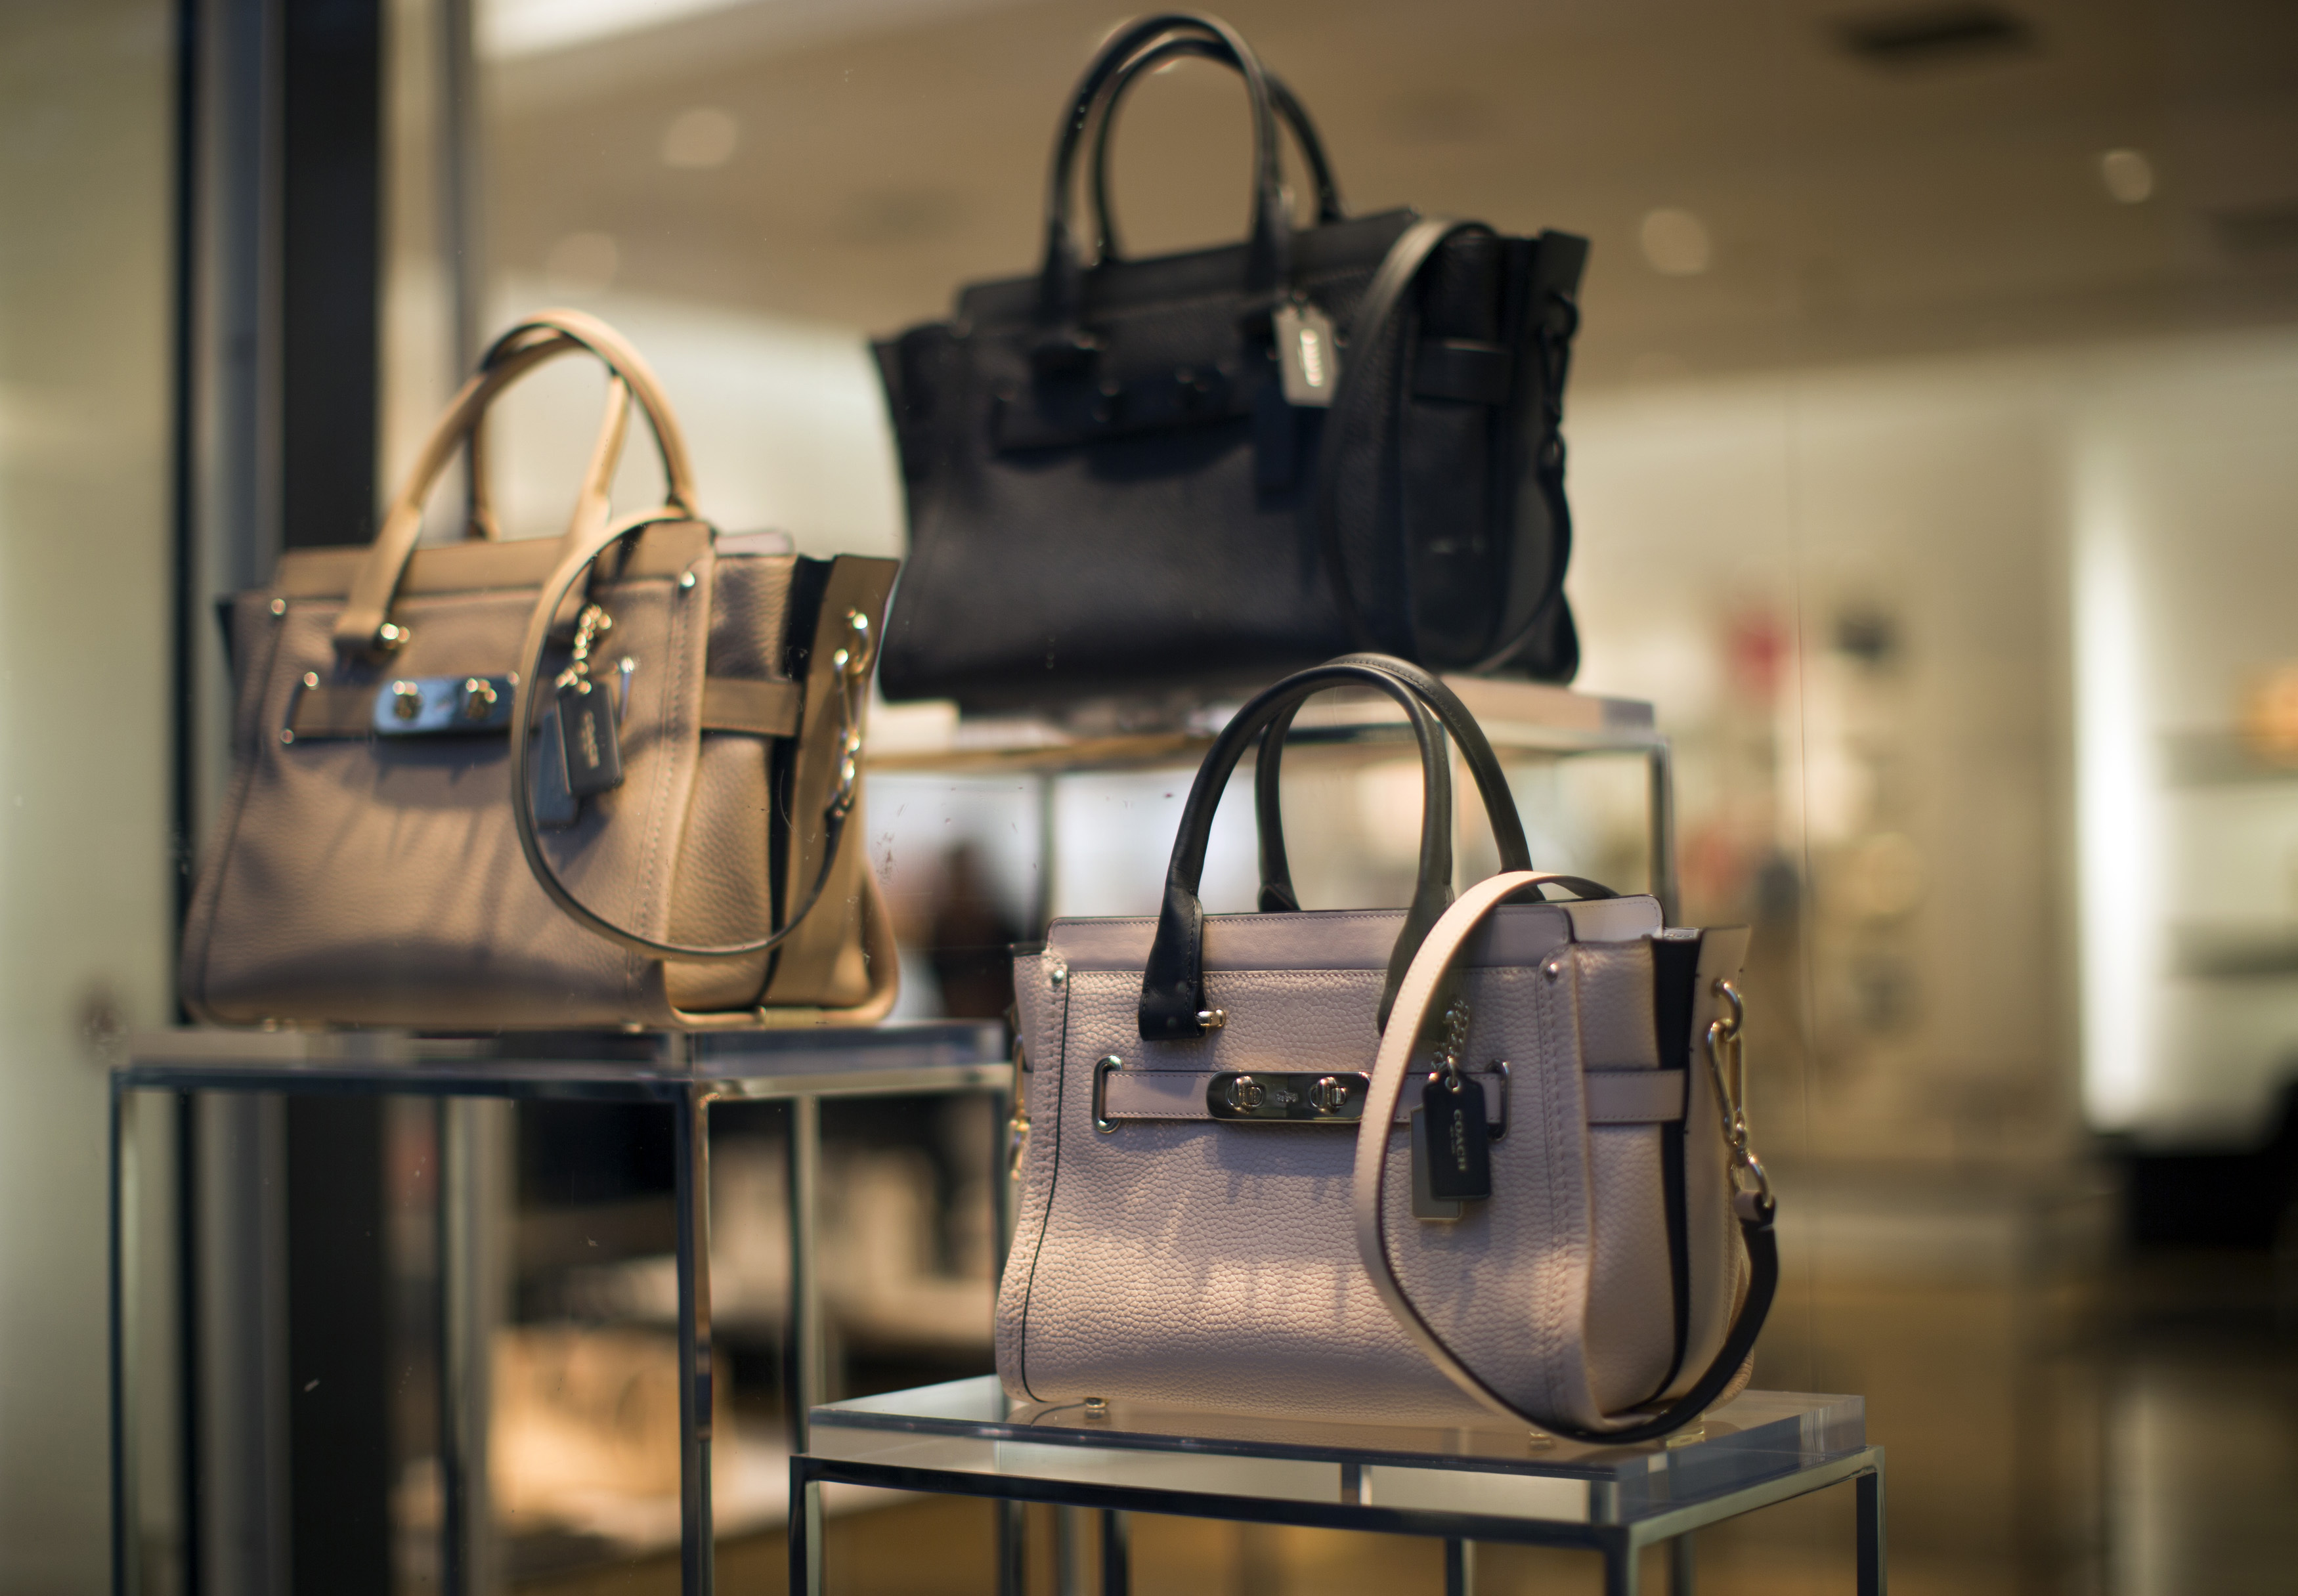 Handbags are pictured through a window of a Coach store in Pasadena